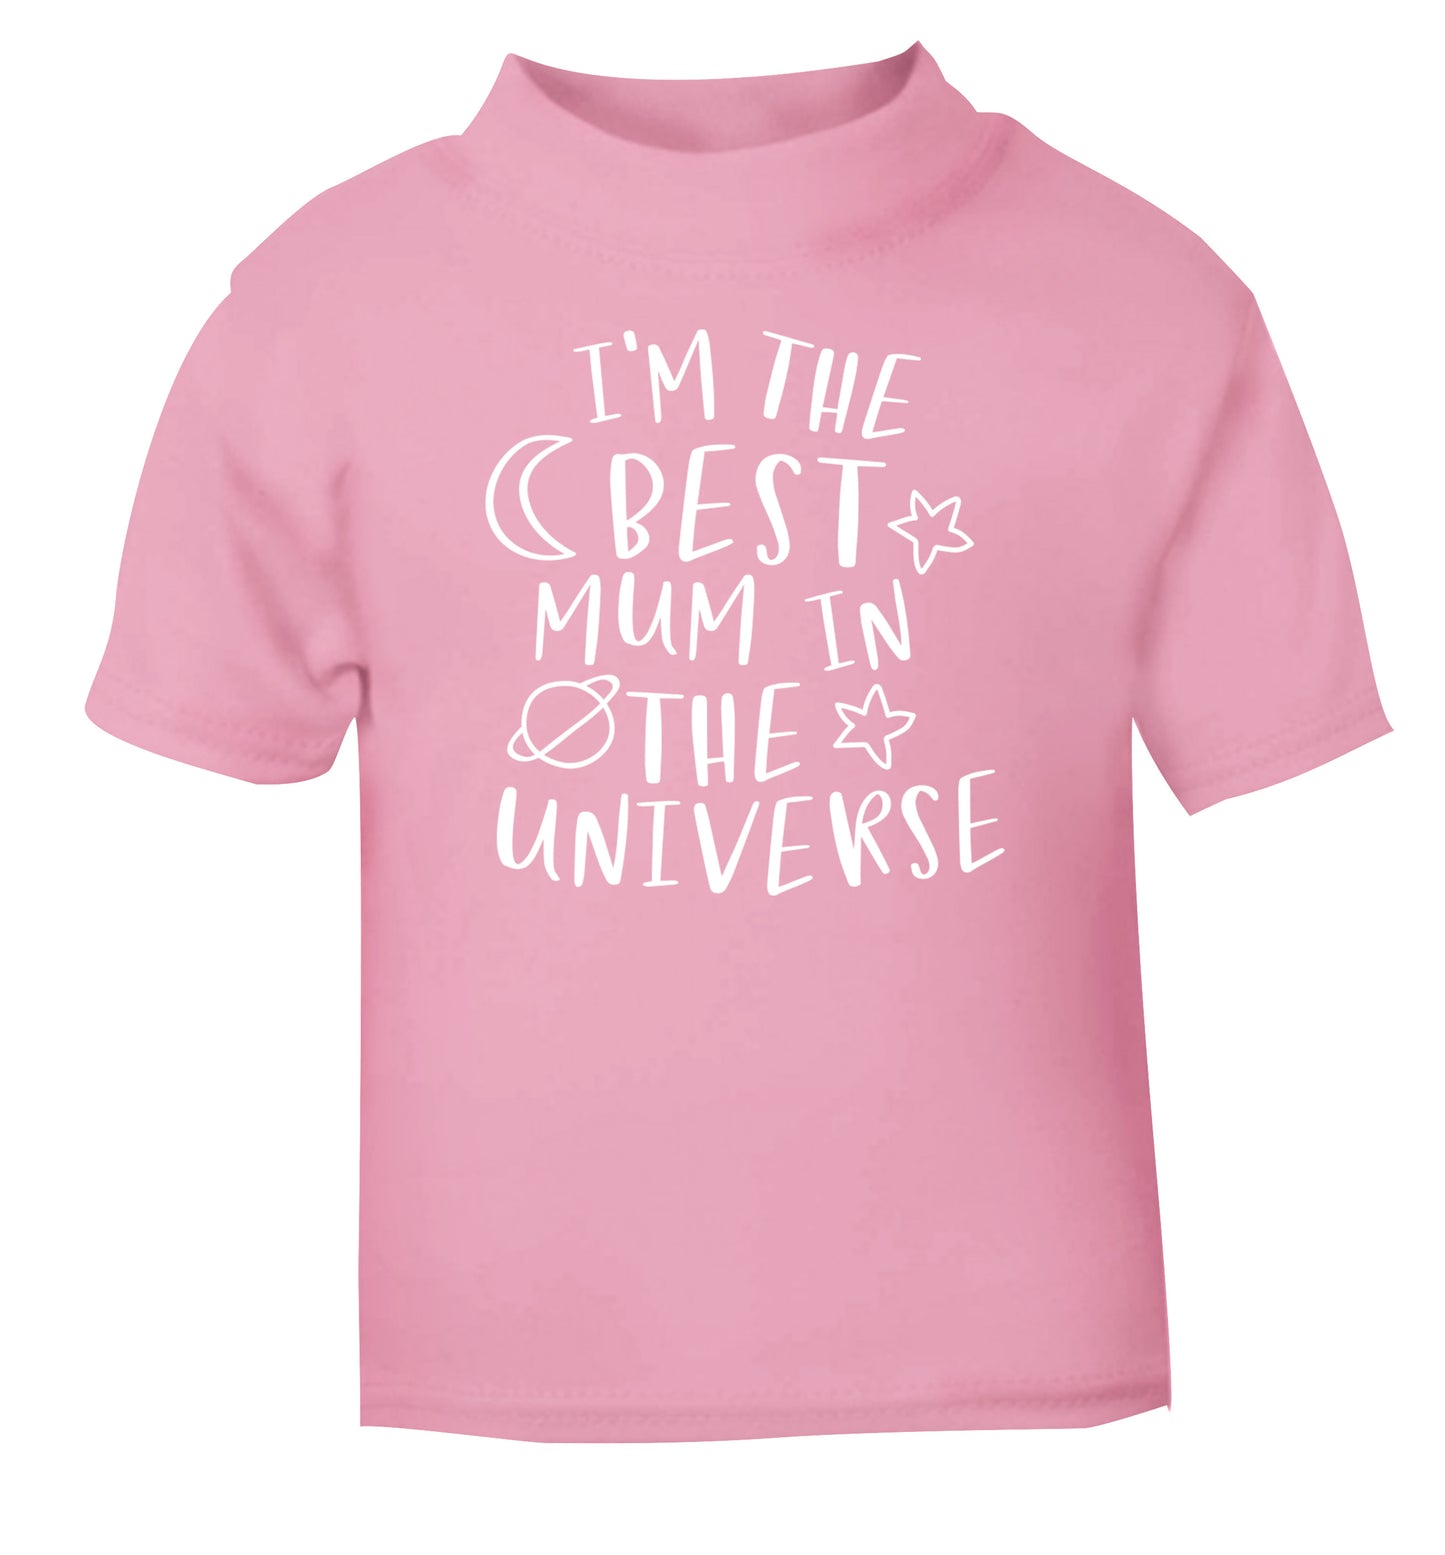 I'm the best mum in the universe light pink baby toddler Tshirt 2 Years